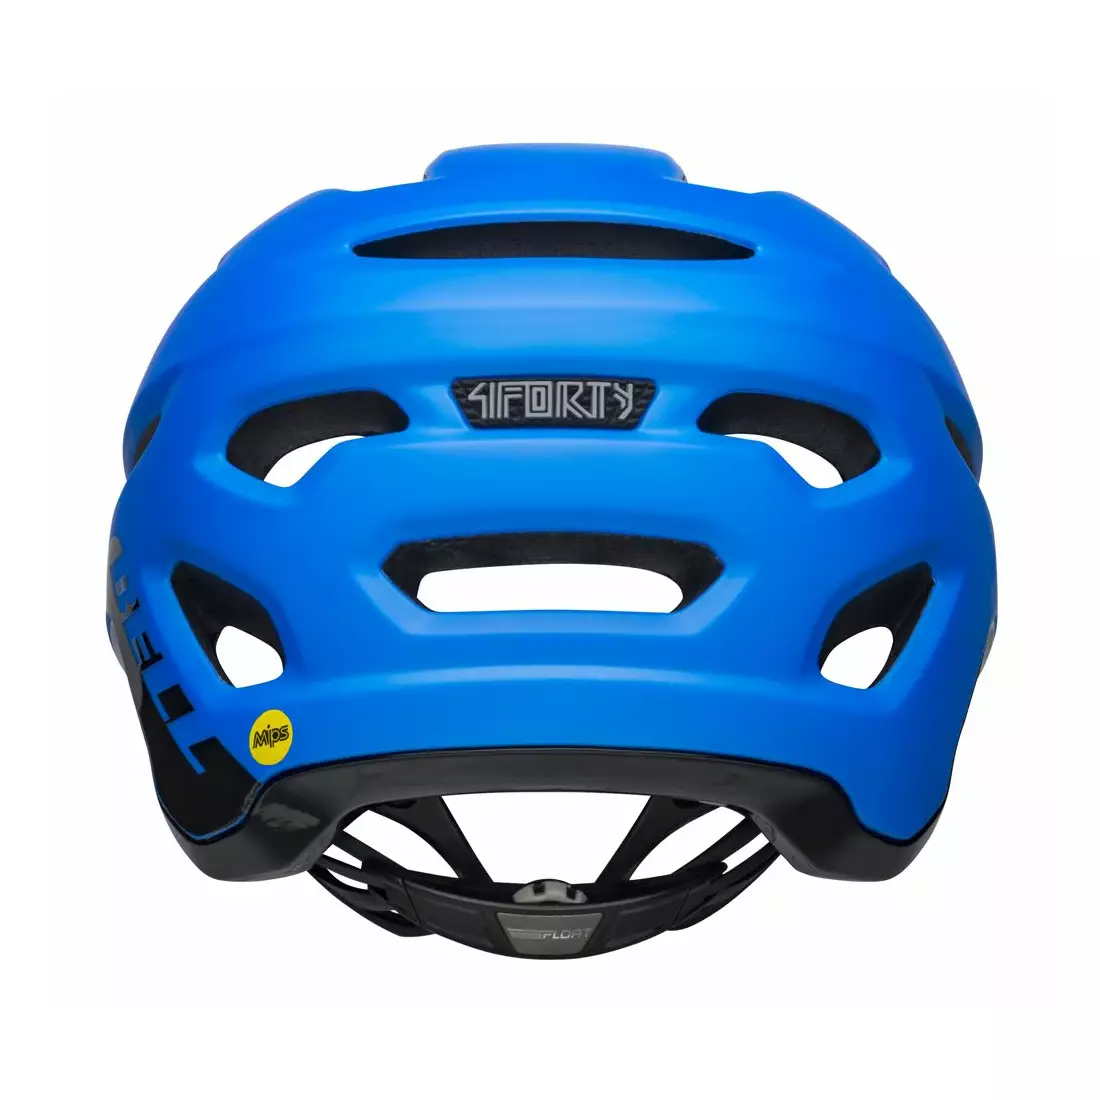 BELL kask rowerowy mtb 4FORTY INTEGRATED MIPS matte gloss blue black BEL-7128894